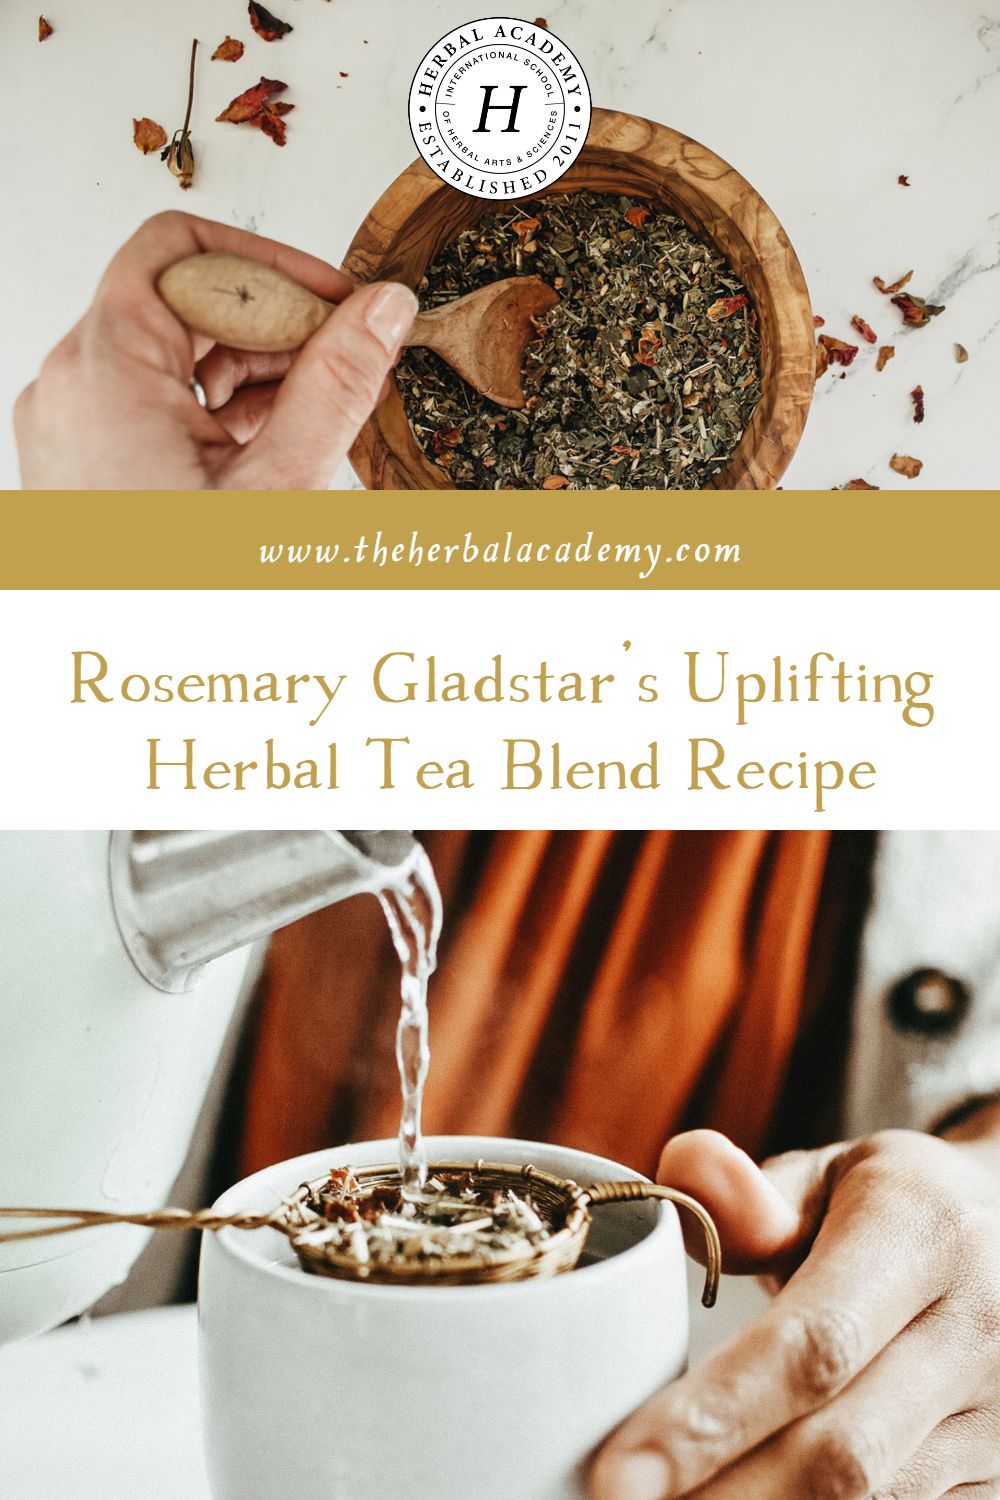 Rosemary Gladstar’s Uplifting Herbal Tea Blend Recipe | Herbal Academy | In this video, we are delighted to have herbalist Rosemary Gladstar share a joyful and uplifting tea blend recipe that is a favorite!